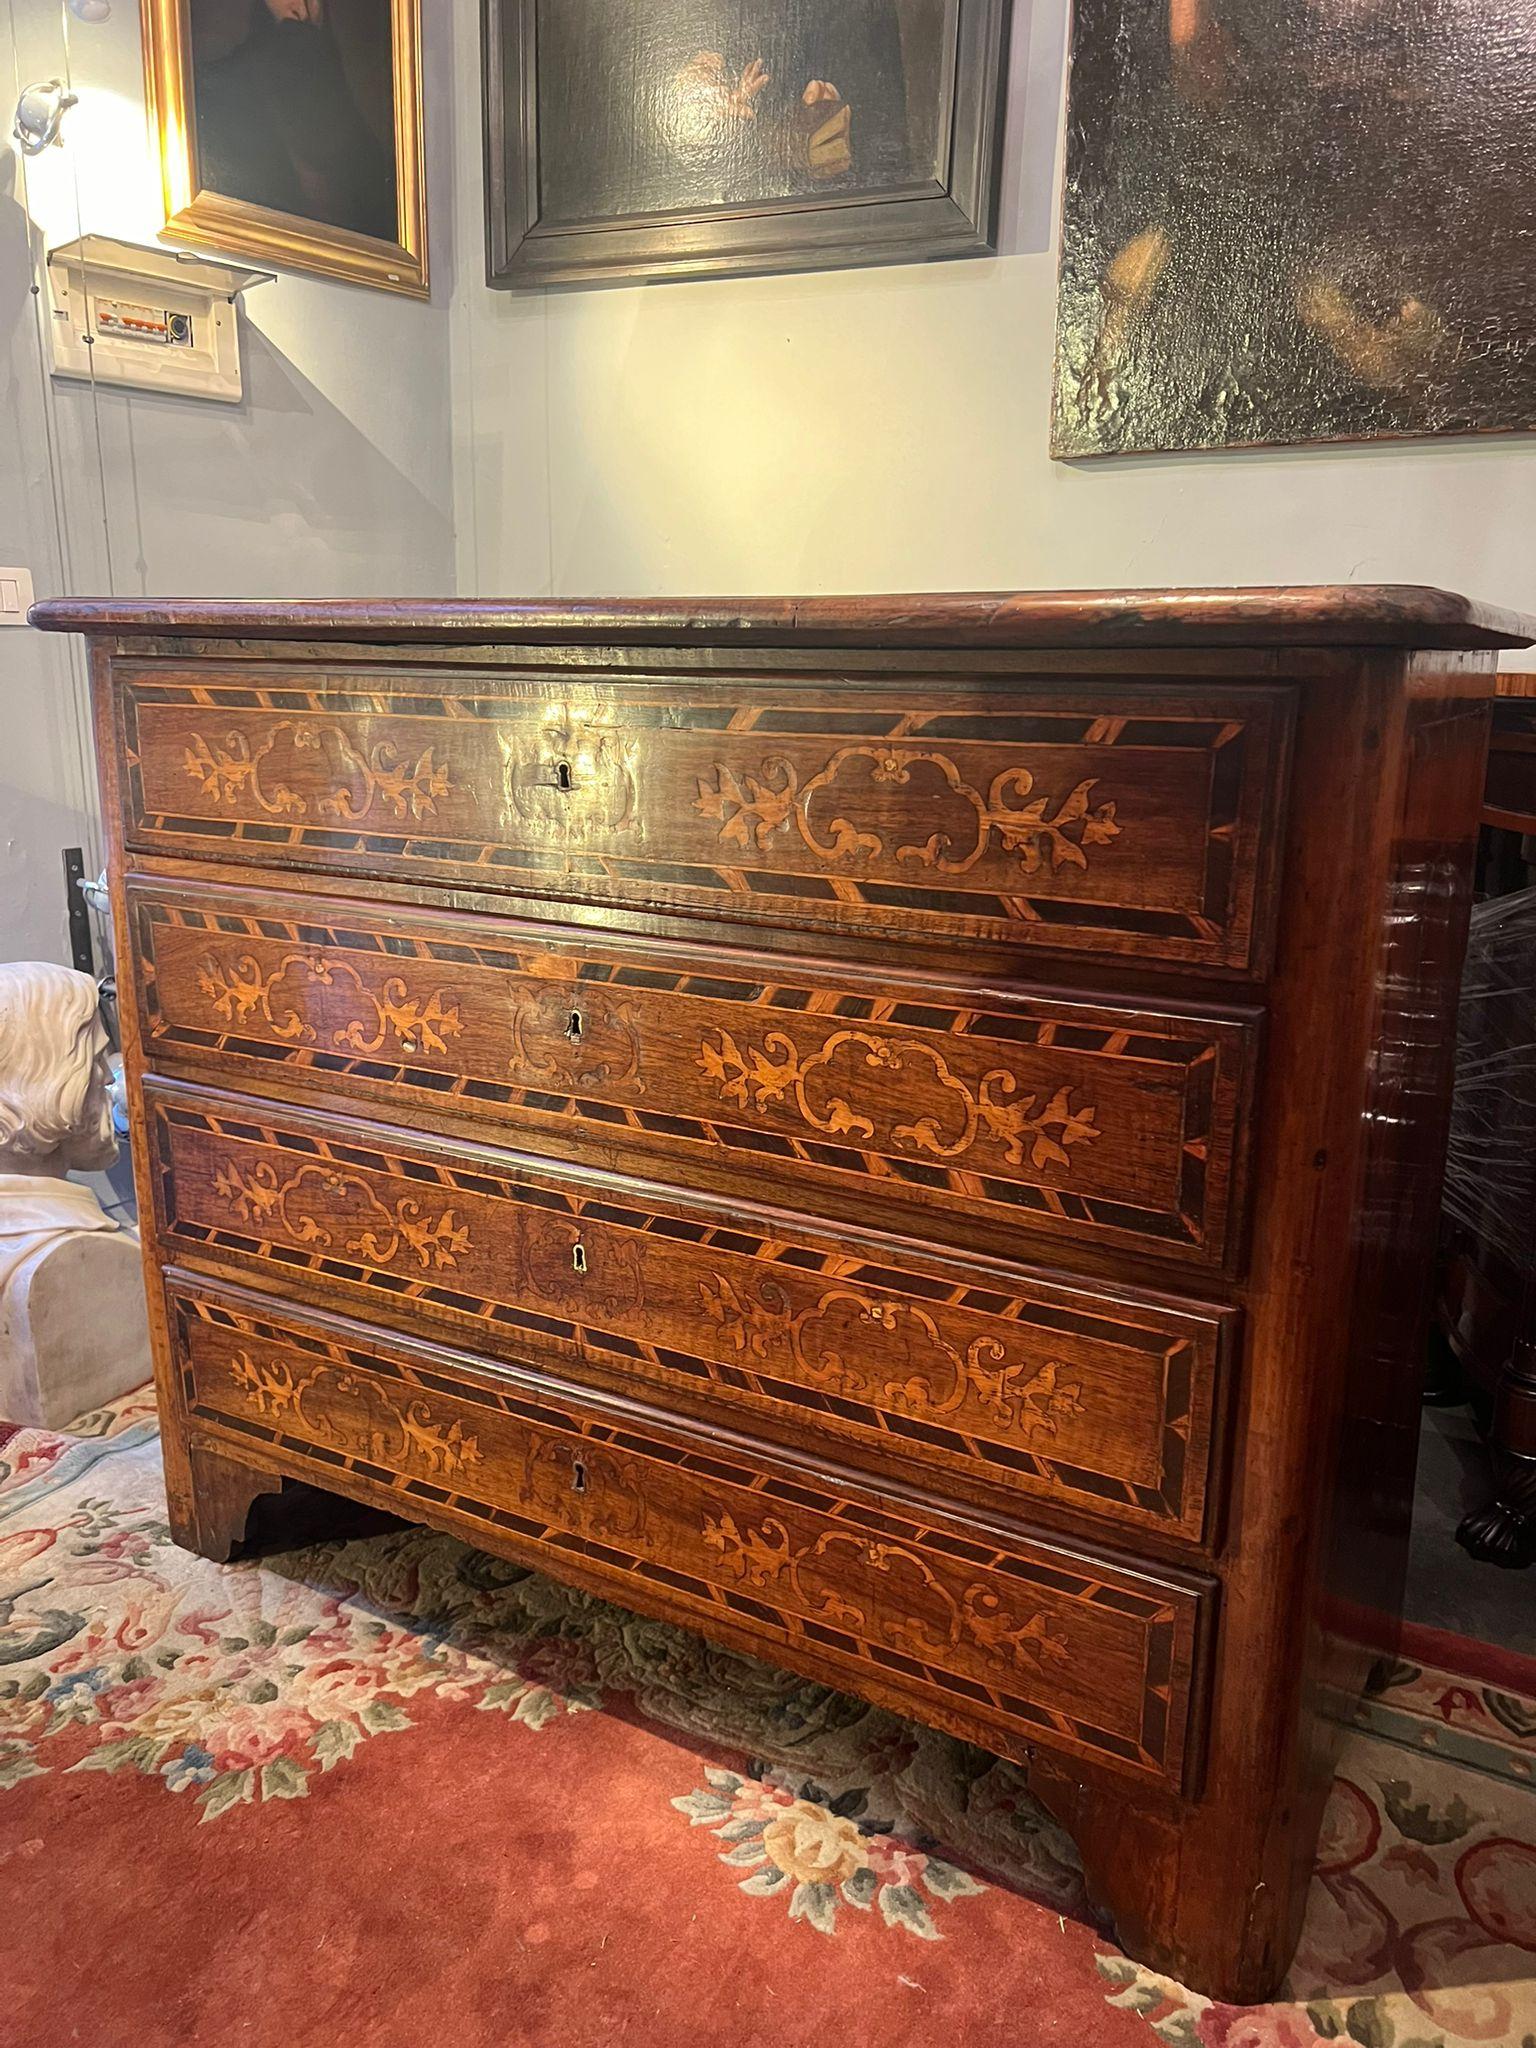 Beautiful solid walnut chest of drawers inlaid with fruit wood. Of fine quality are precisely the inlay decorations that are present on the sides on the top and drawers. The furniture is in original patina having never undergone any paint stripping